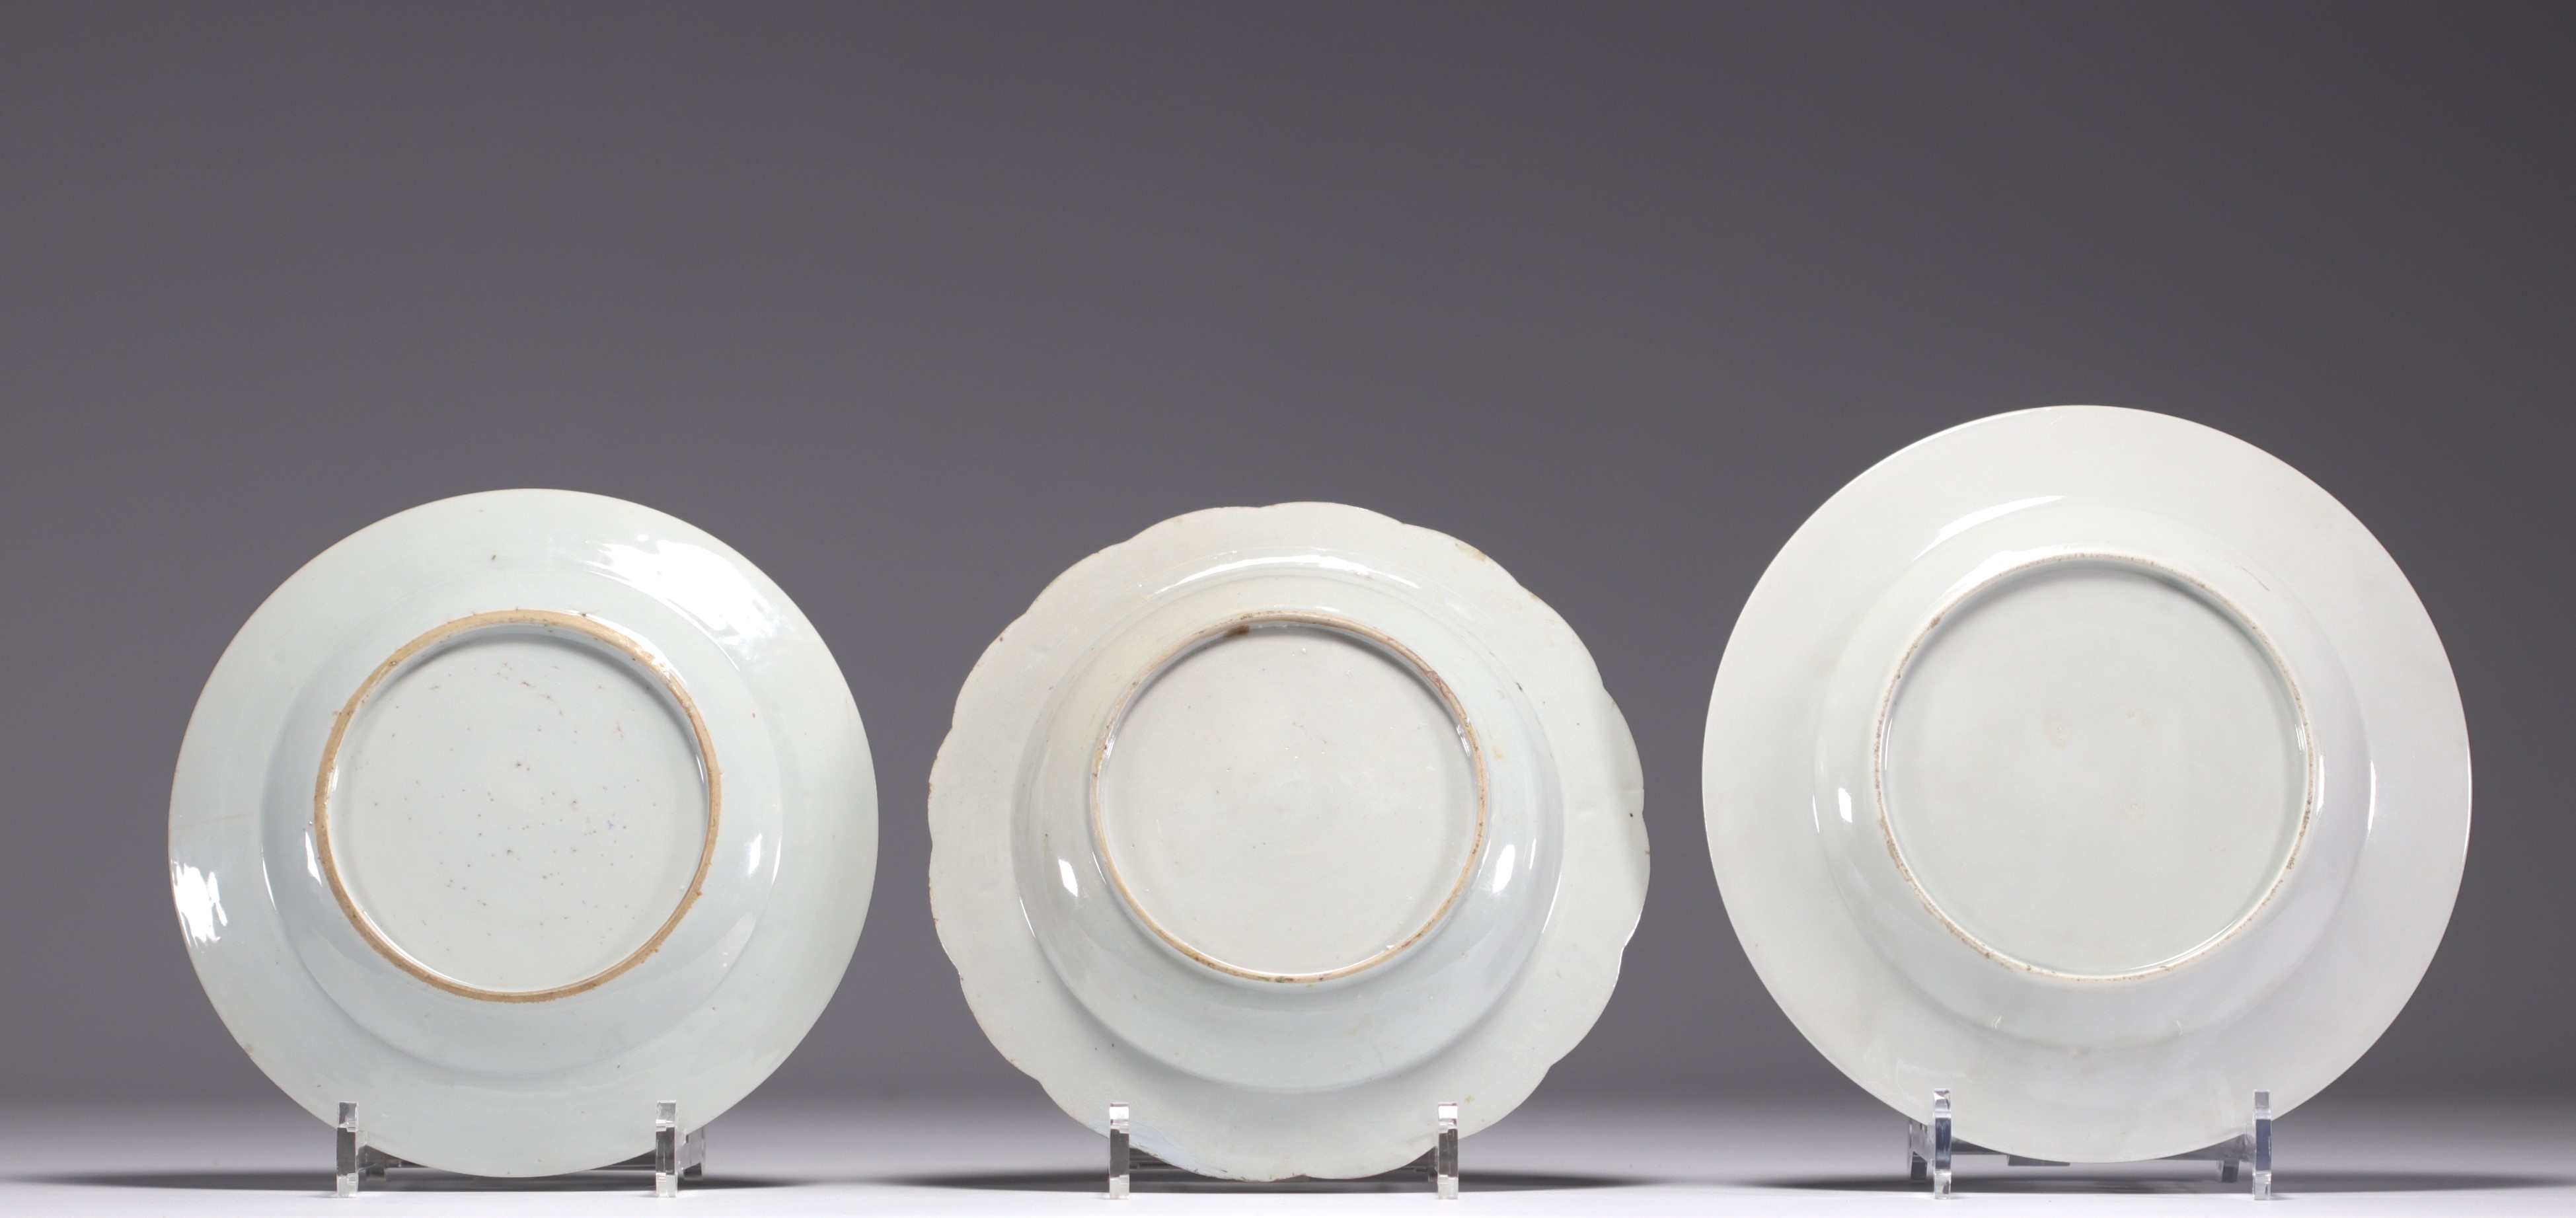 China - Set of three Famille Rose porcelain plates with floral decoration. - Image 2 of 2